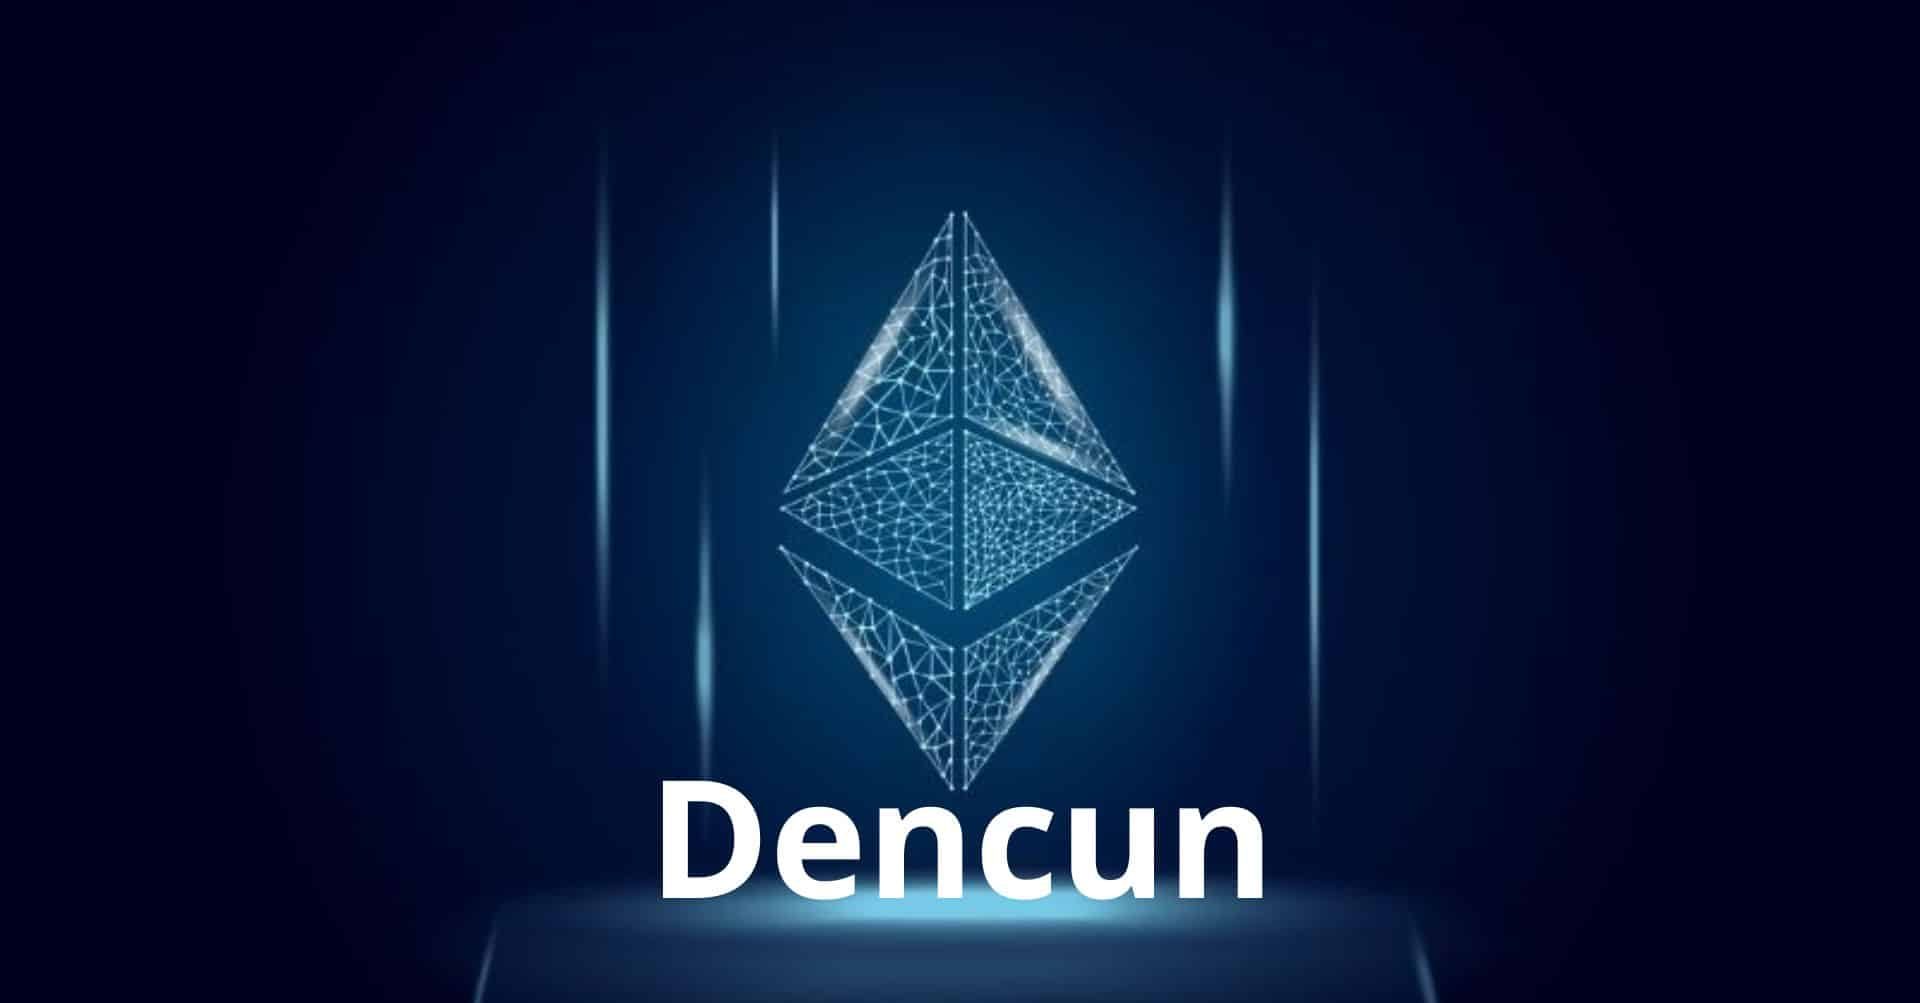 The Dencun Upgrade is not enough to scale Ethereum